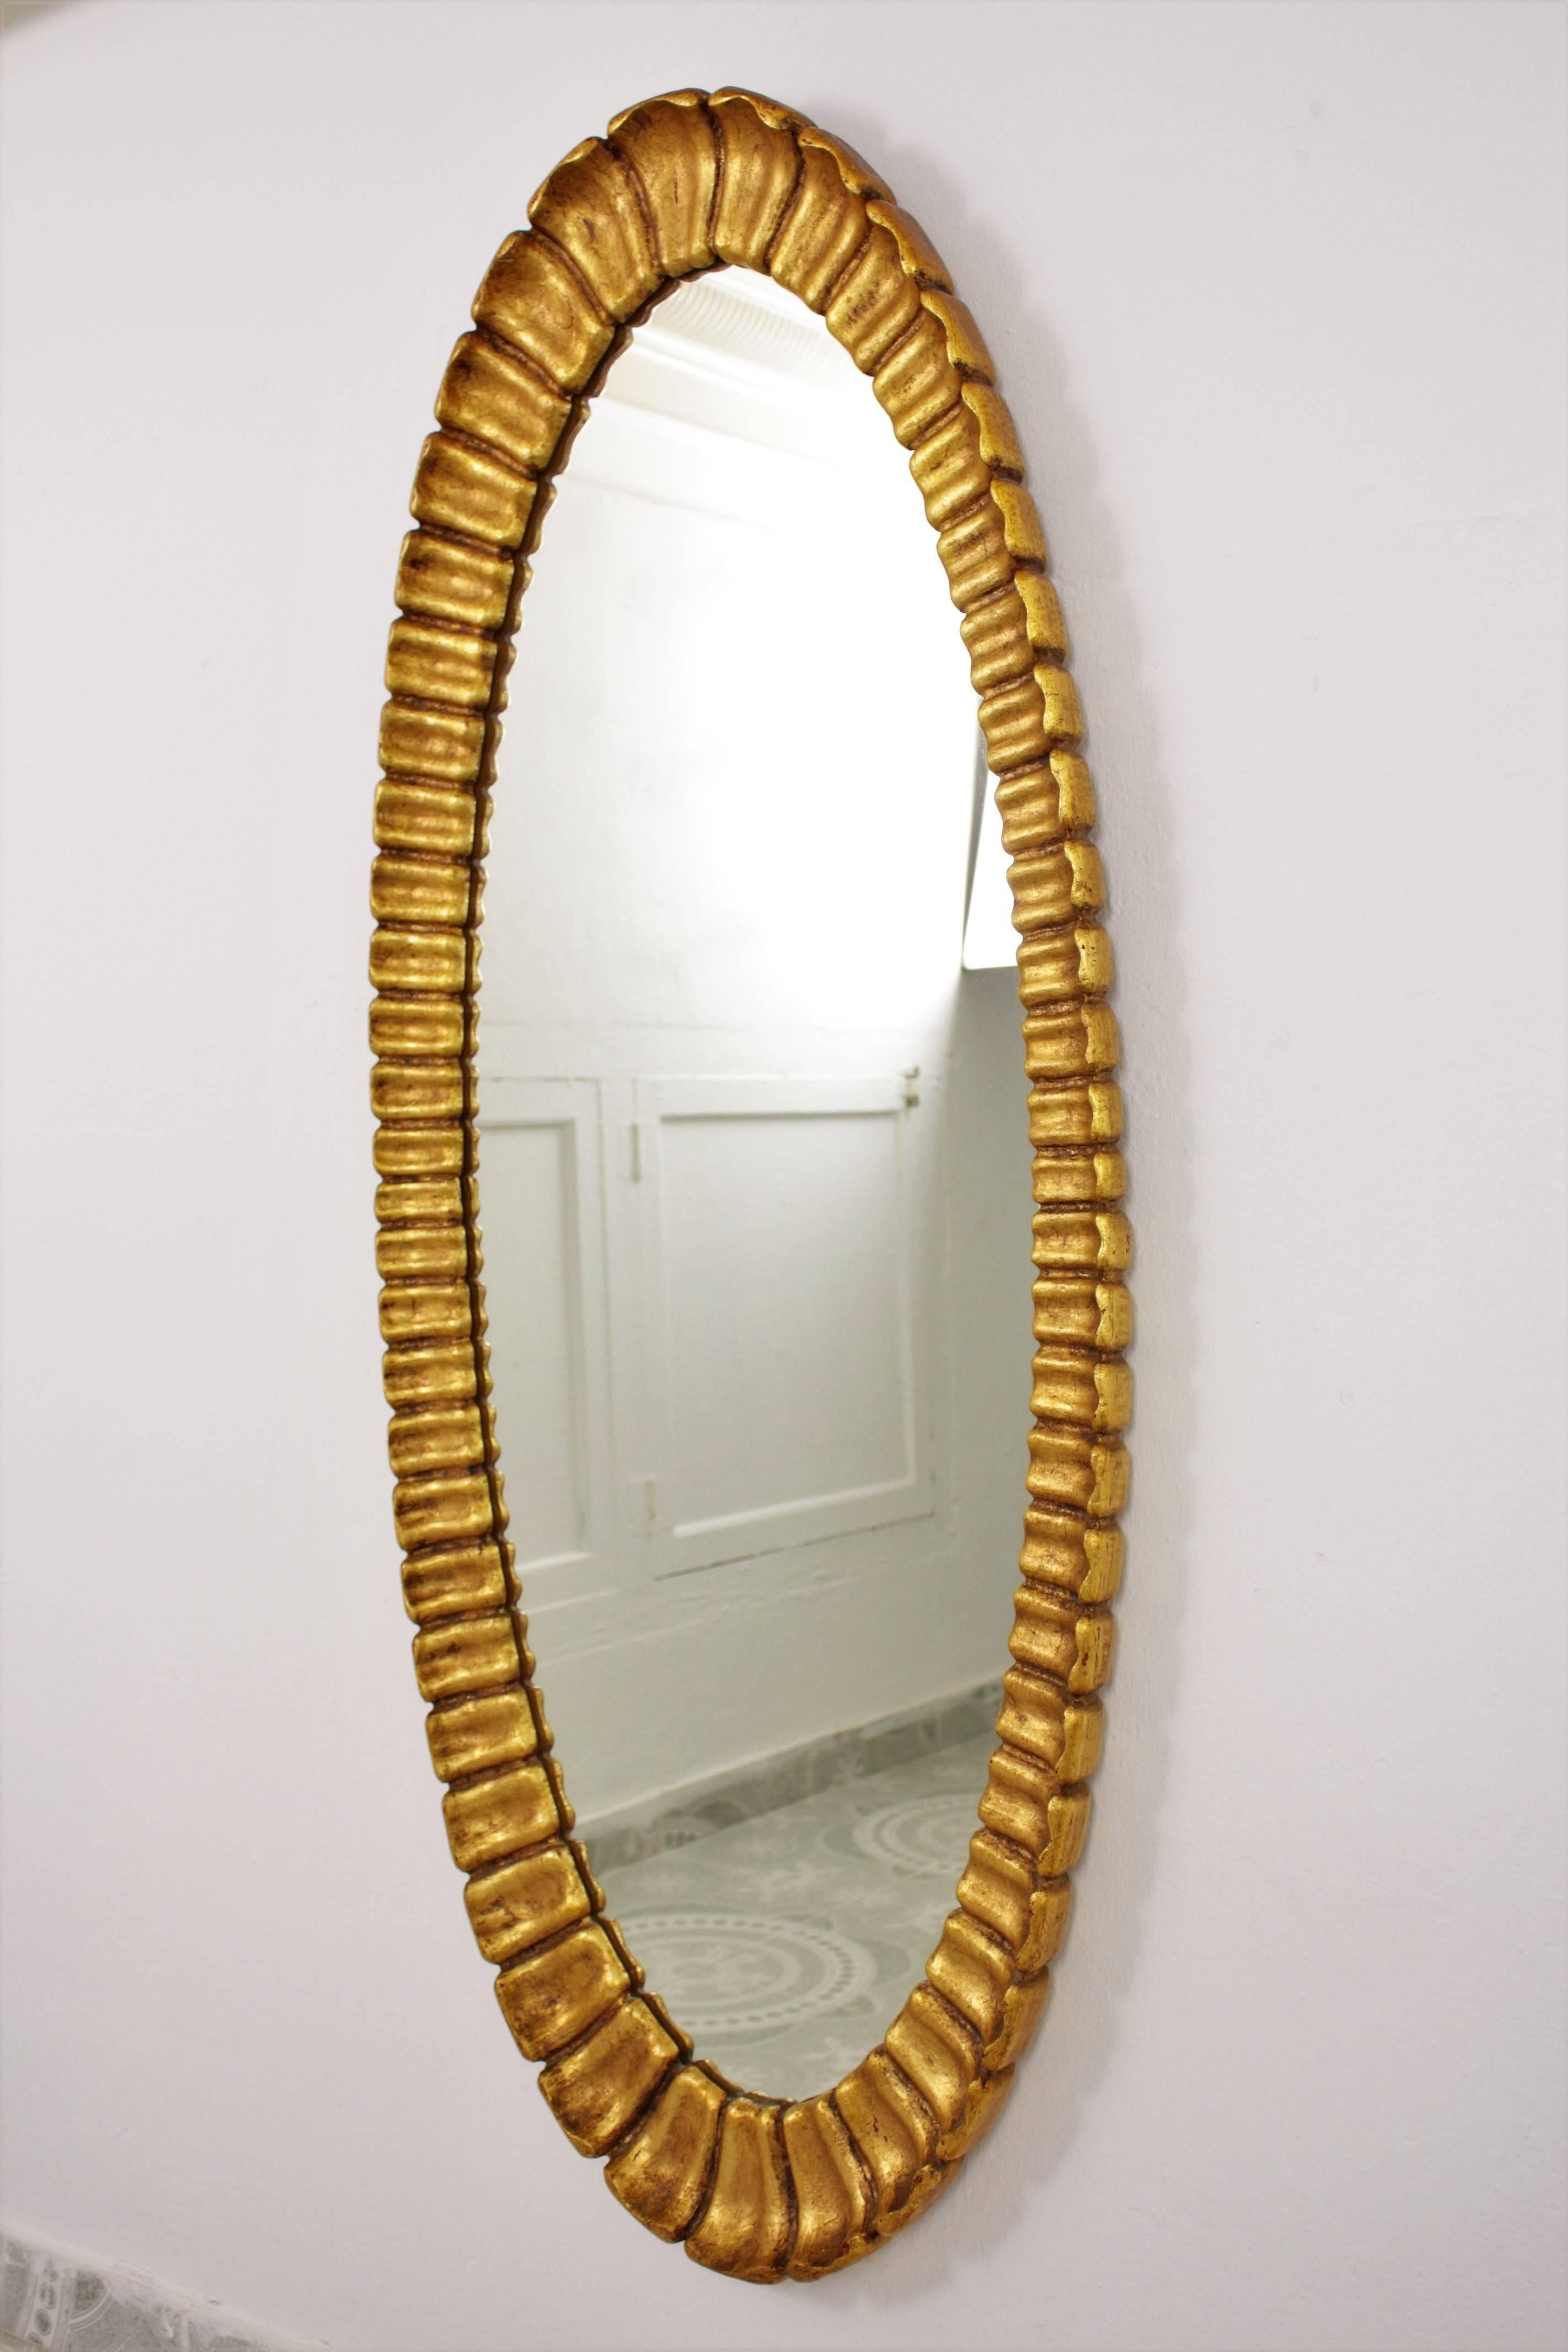 Sculptural and finely carved Hollywood Regency style scalloped giltwood mirror with gold-leaf finish. Amazing patina.
Designed and manufactured by Francisco Hurtado.
Original label of the workshop at the back.

Spain, 1950s.

